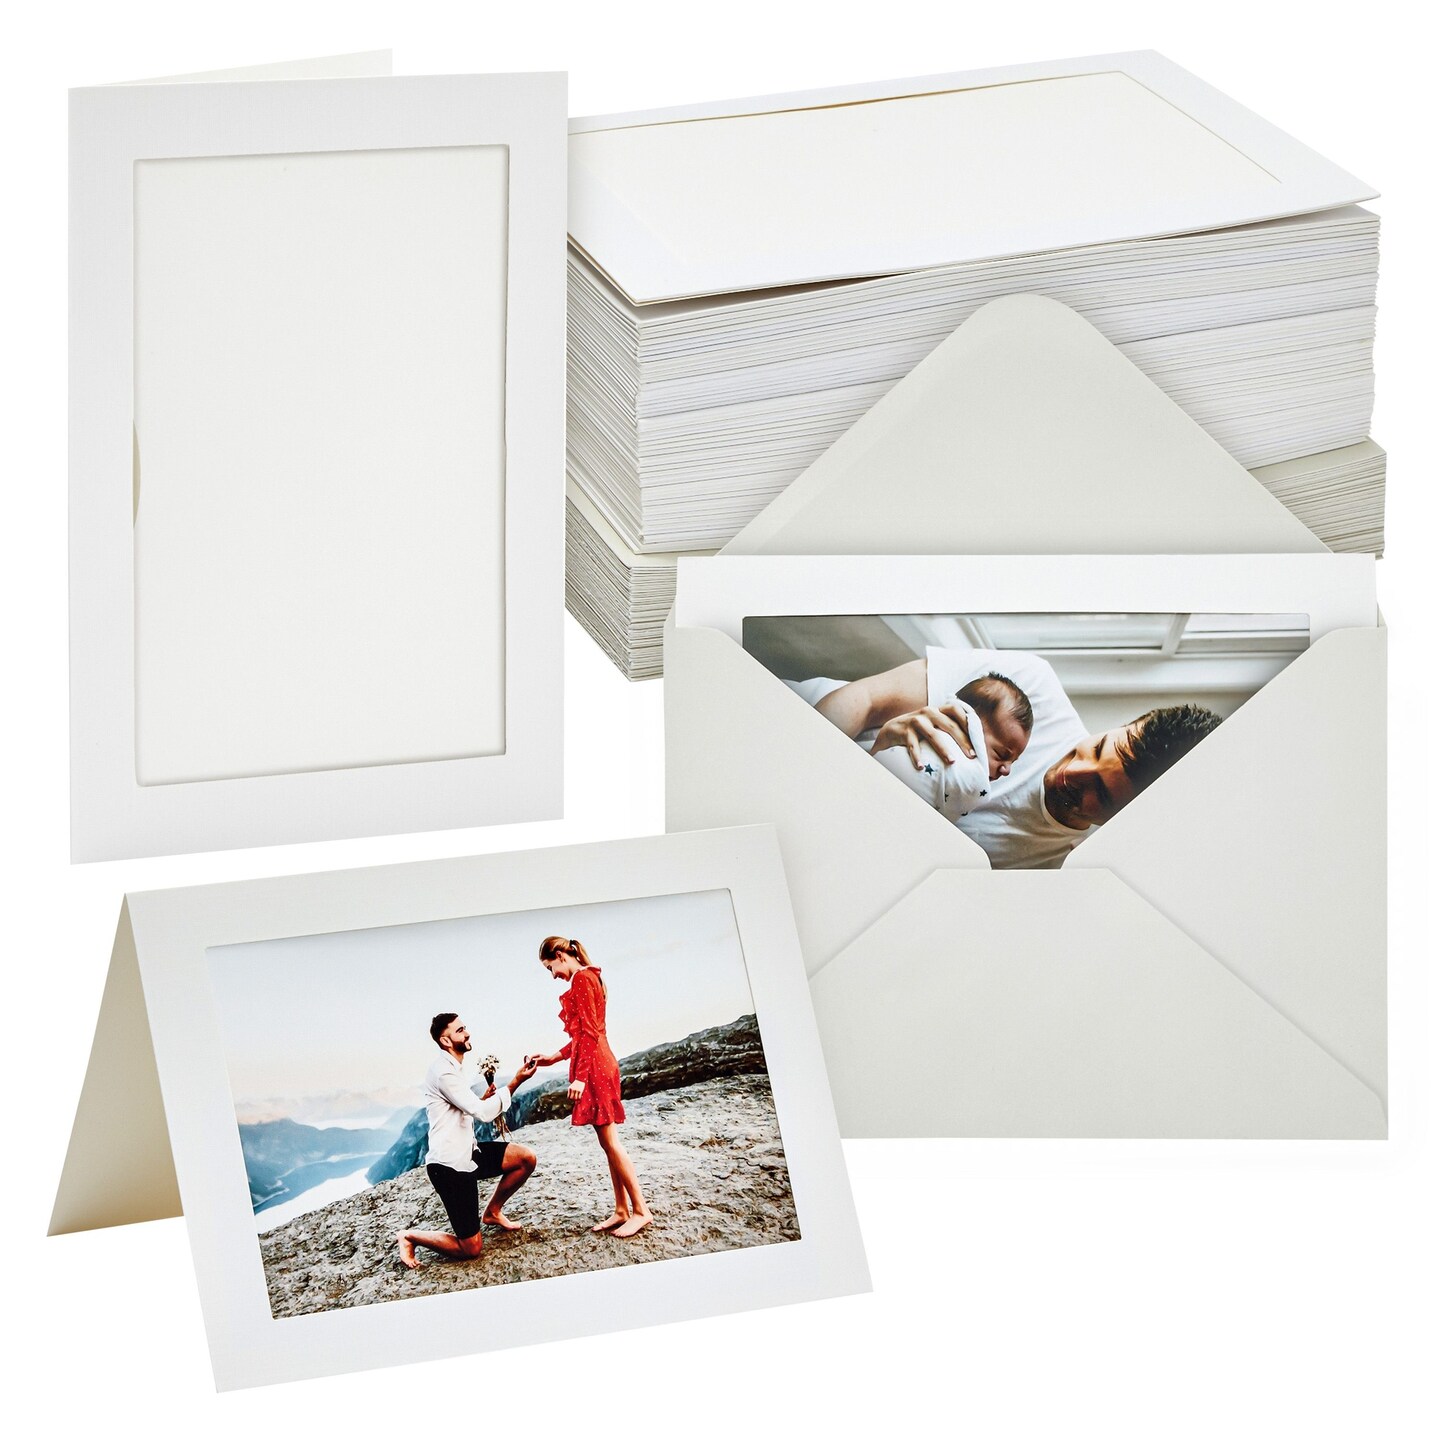 5x7 Paper Picture Frames with Easel, Paper Photo Frame Cards, DIY